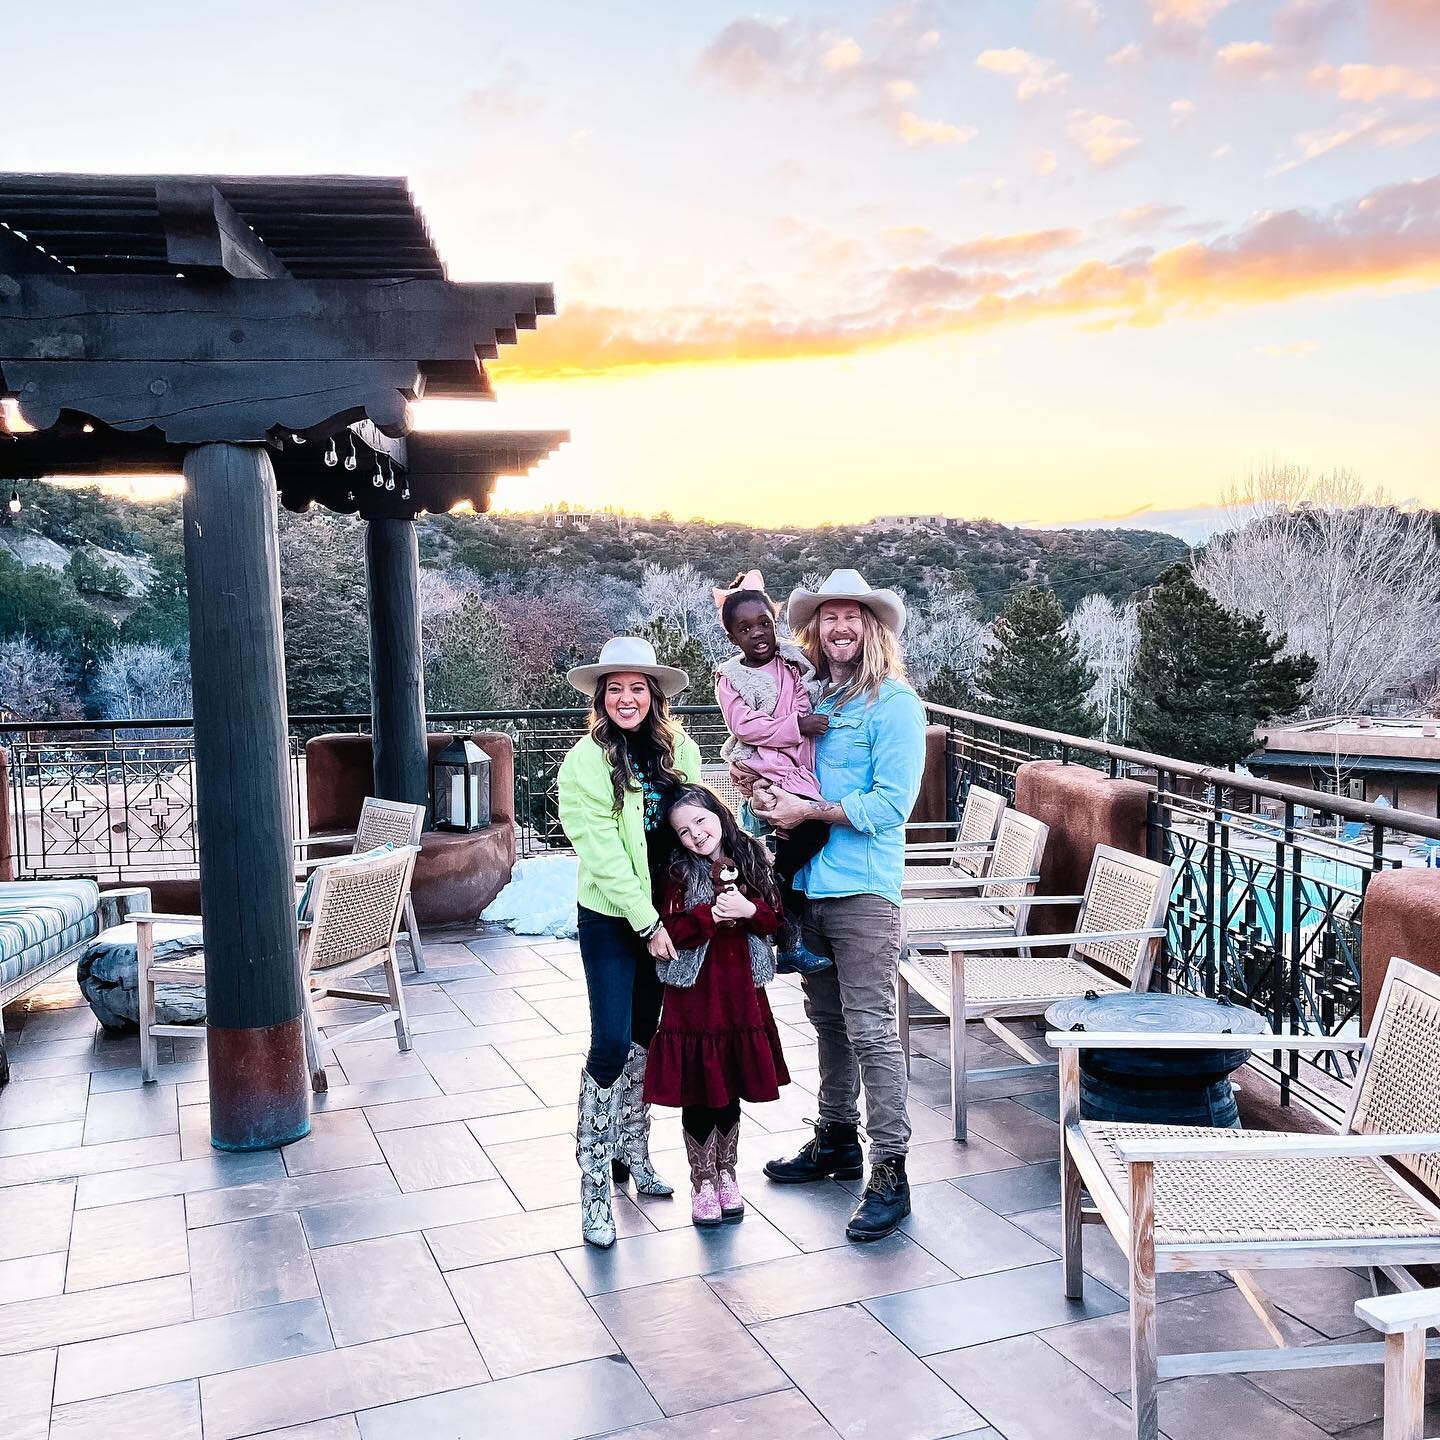 Nothing beats happy hour with a Sunset.
Bishops Lodge SkyFire restaurant is one of our favorite spots to grab a drink or bite to eat in the city. 

#santafe #newmexico #BishopsLodge #SkyFirerestaurant #happyhour #santafesunsets #interiordesign #santa